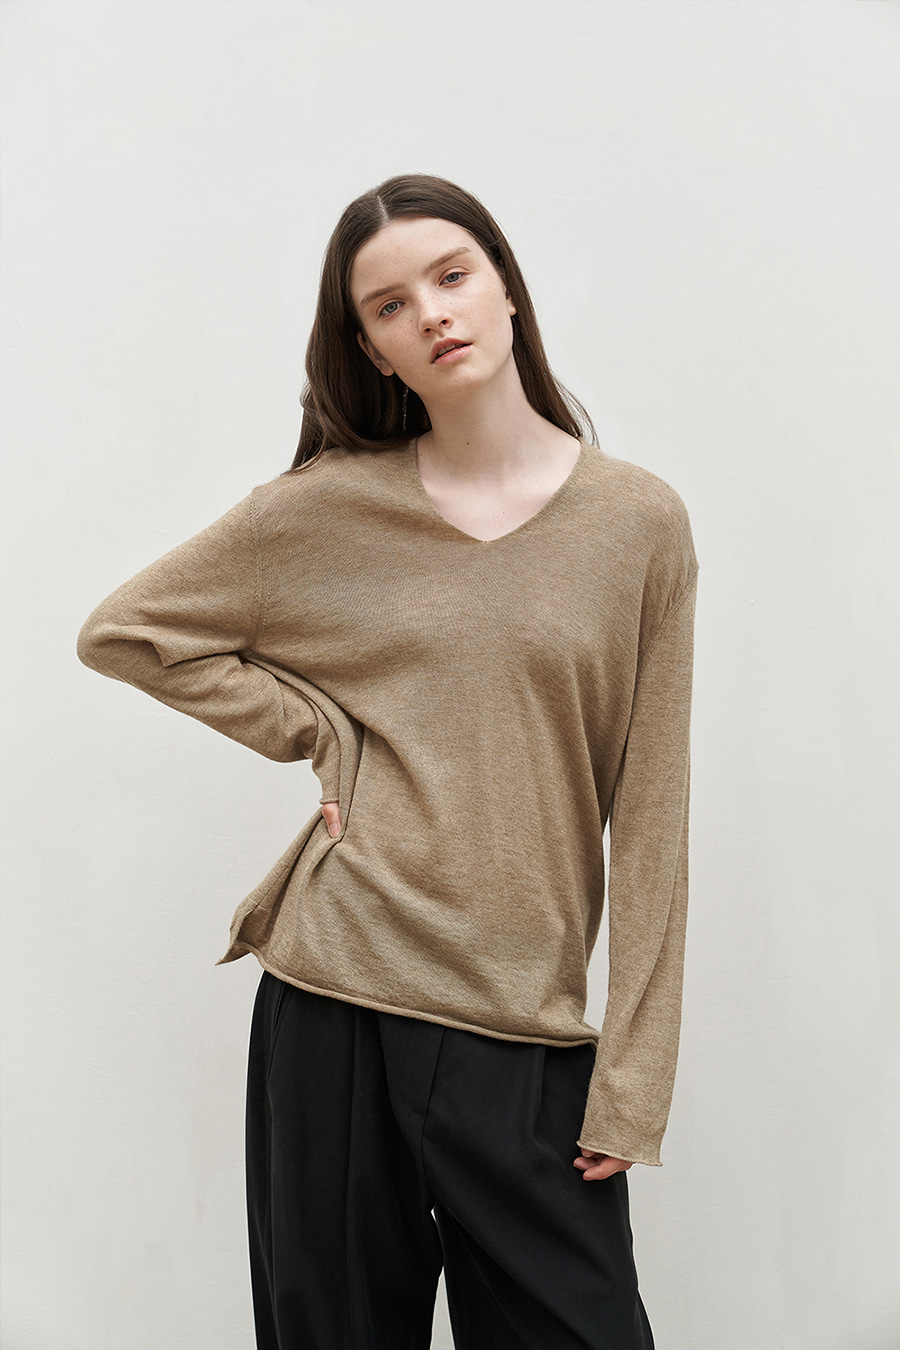 21 essential loose knit top